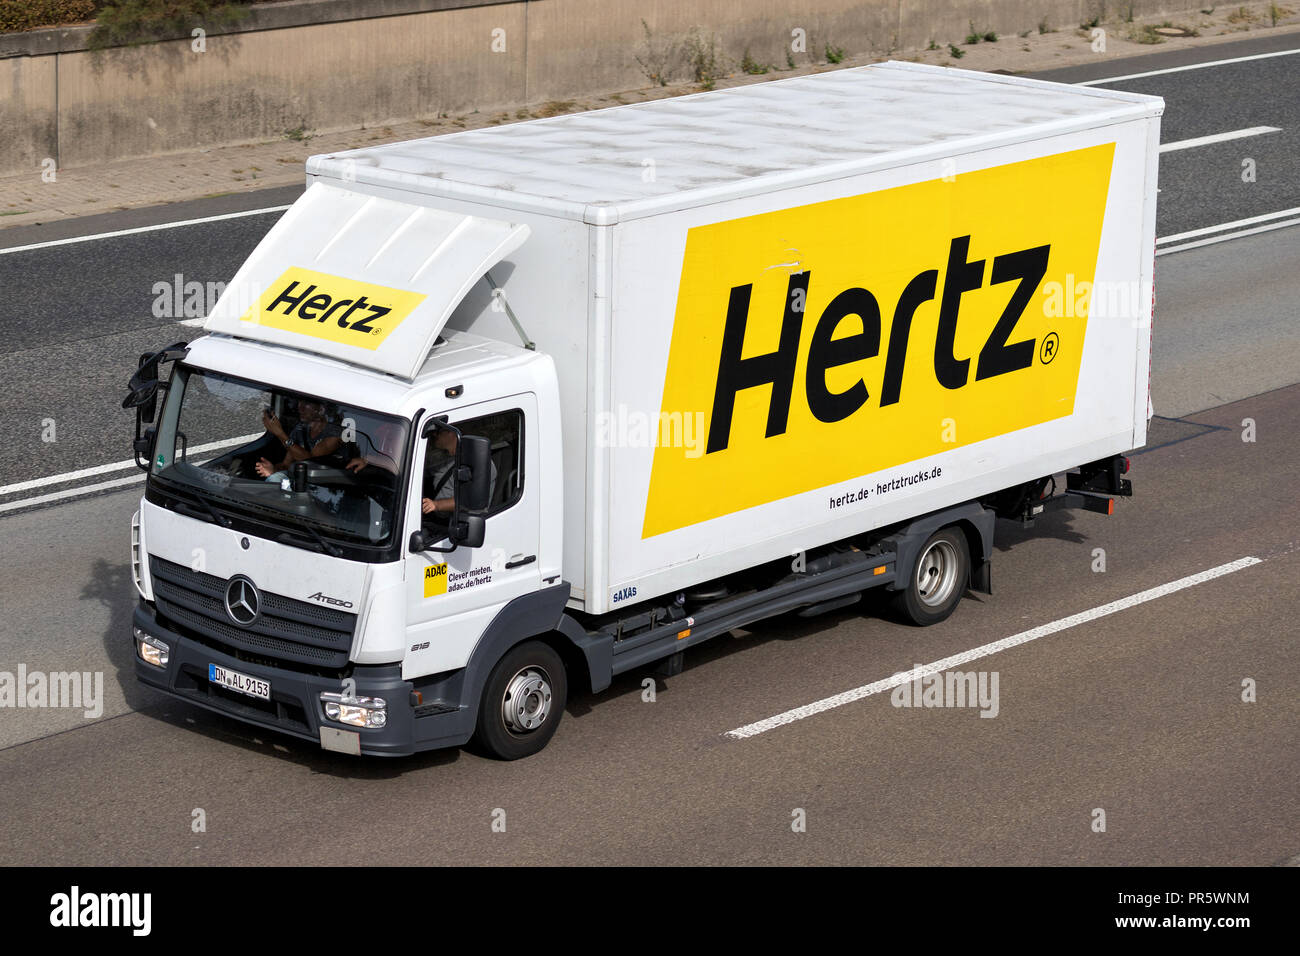 Mercedes-Benz Atego of Hertz on motorway. The Hertz Corporation is an American car rental company based in Estero, Florida. Stock Photo